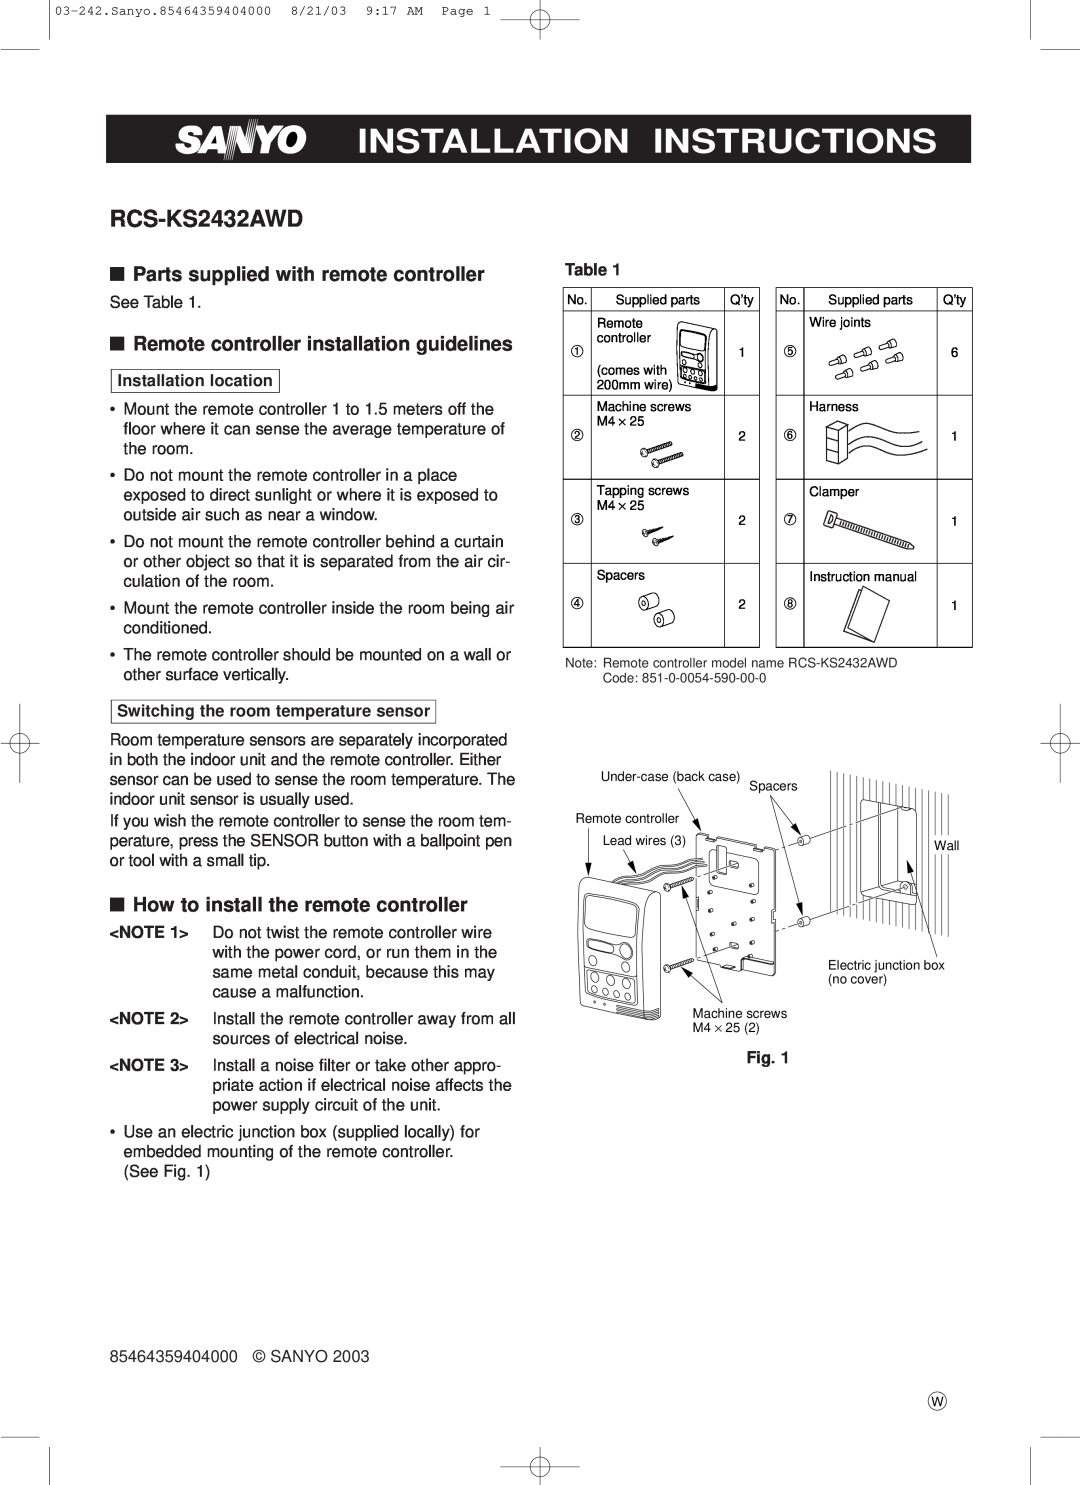 Sanyo RCS-KS2432AWD installation instructions Parts supplied with remote controller, How to install the remote controller 